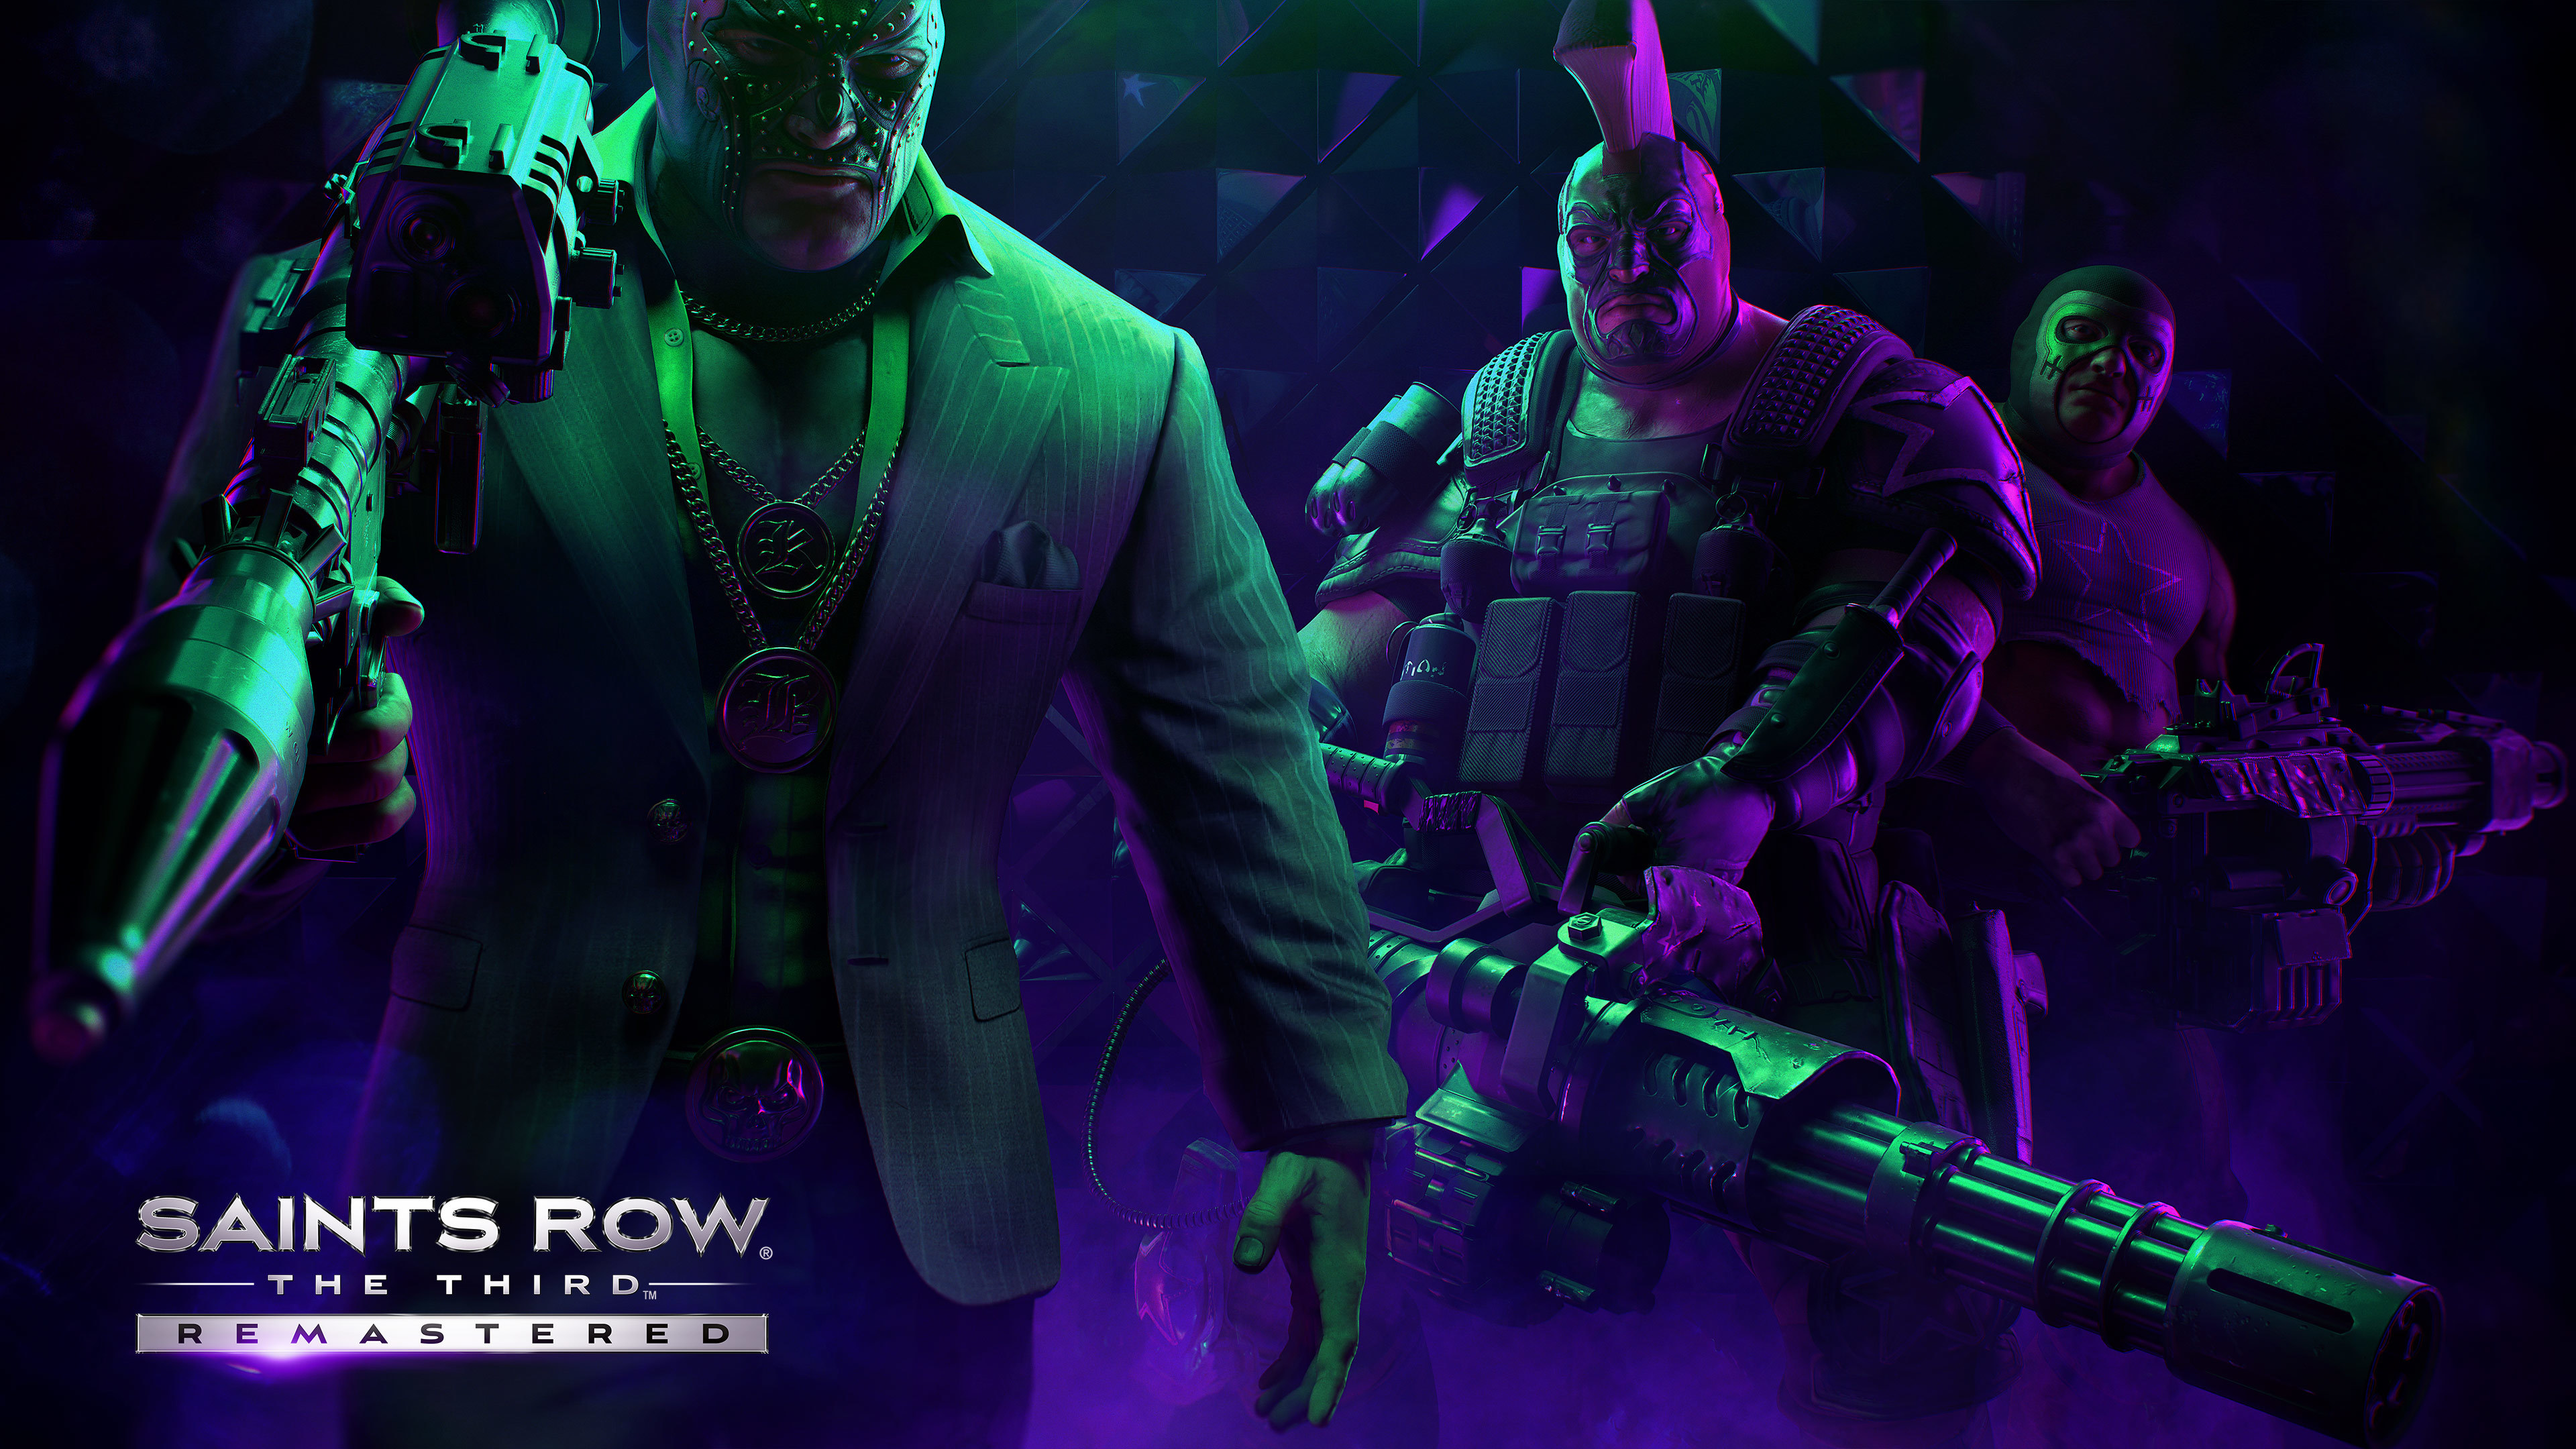 saint row the third remastered download free